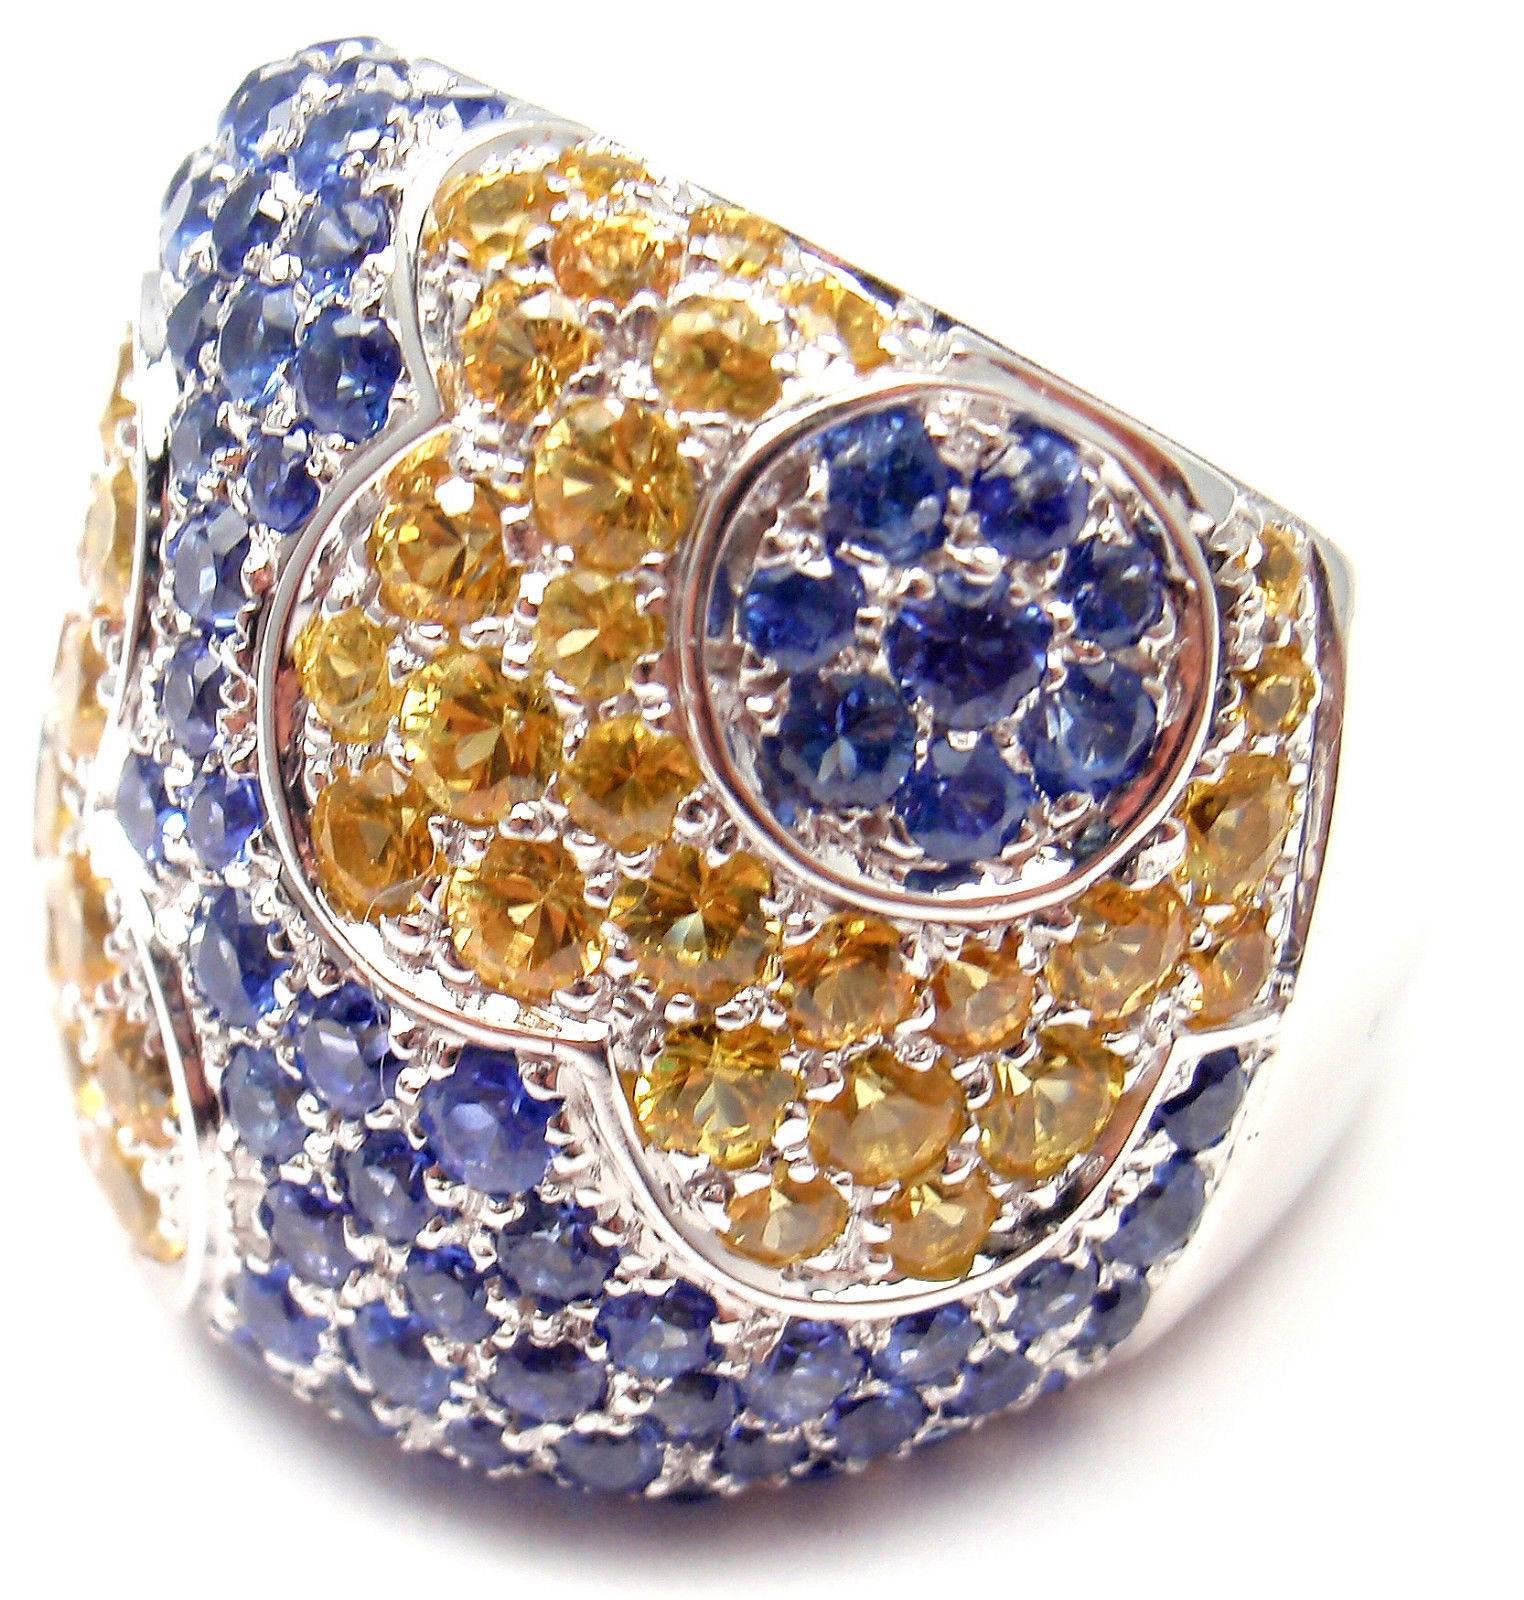 18k White Gold Sapphire COLOURS Petals Ring by Pasquale Bruni. 
With Blue & Yellow Sapphires total weigh approx. 5.97ct

This ring comes with Box, Certificate and Tag.   

Details: 
Size: 7 
Weight: 22.1 grams 
Width: 23.5mm 
Stamped